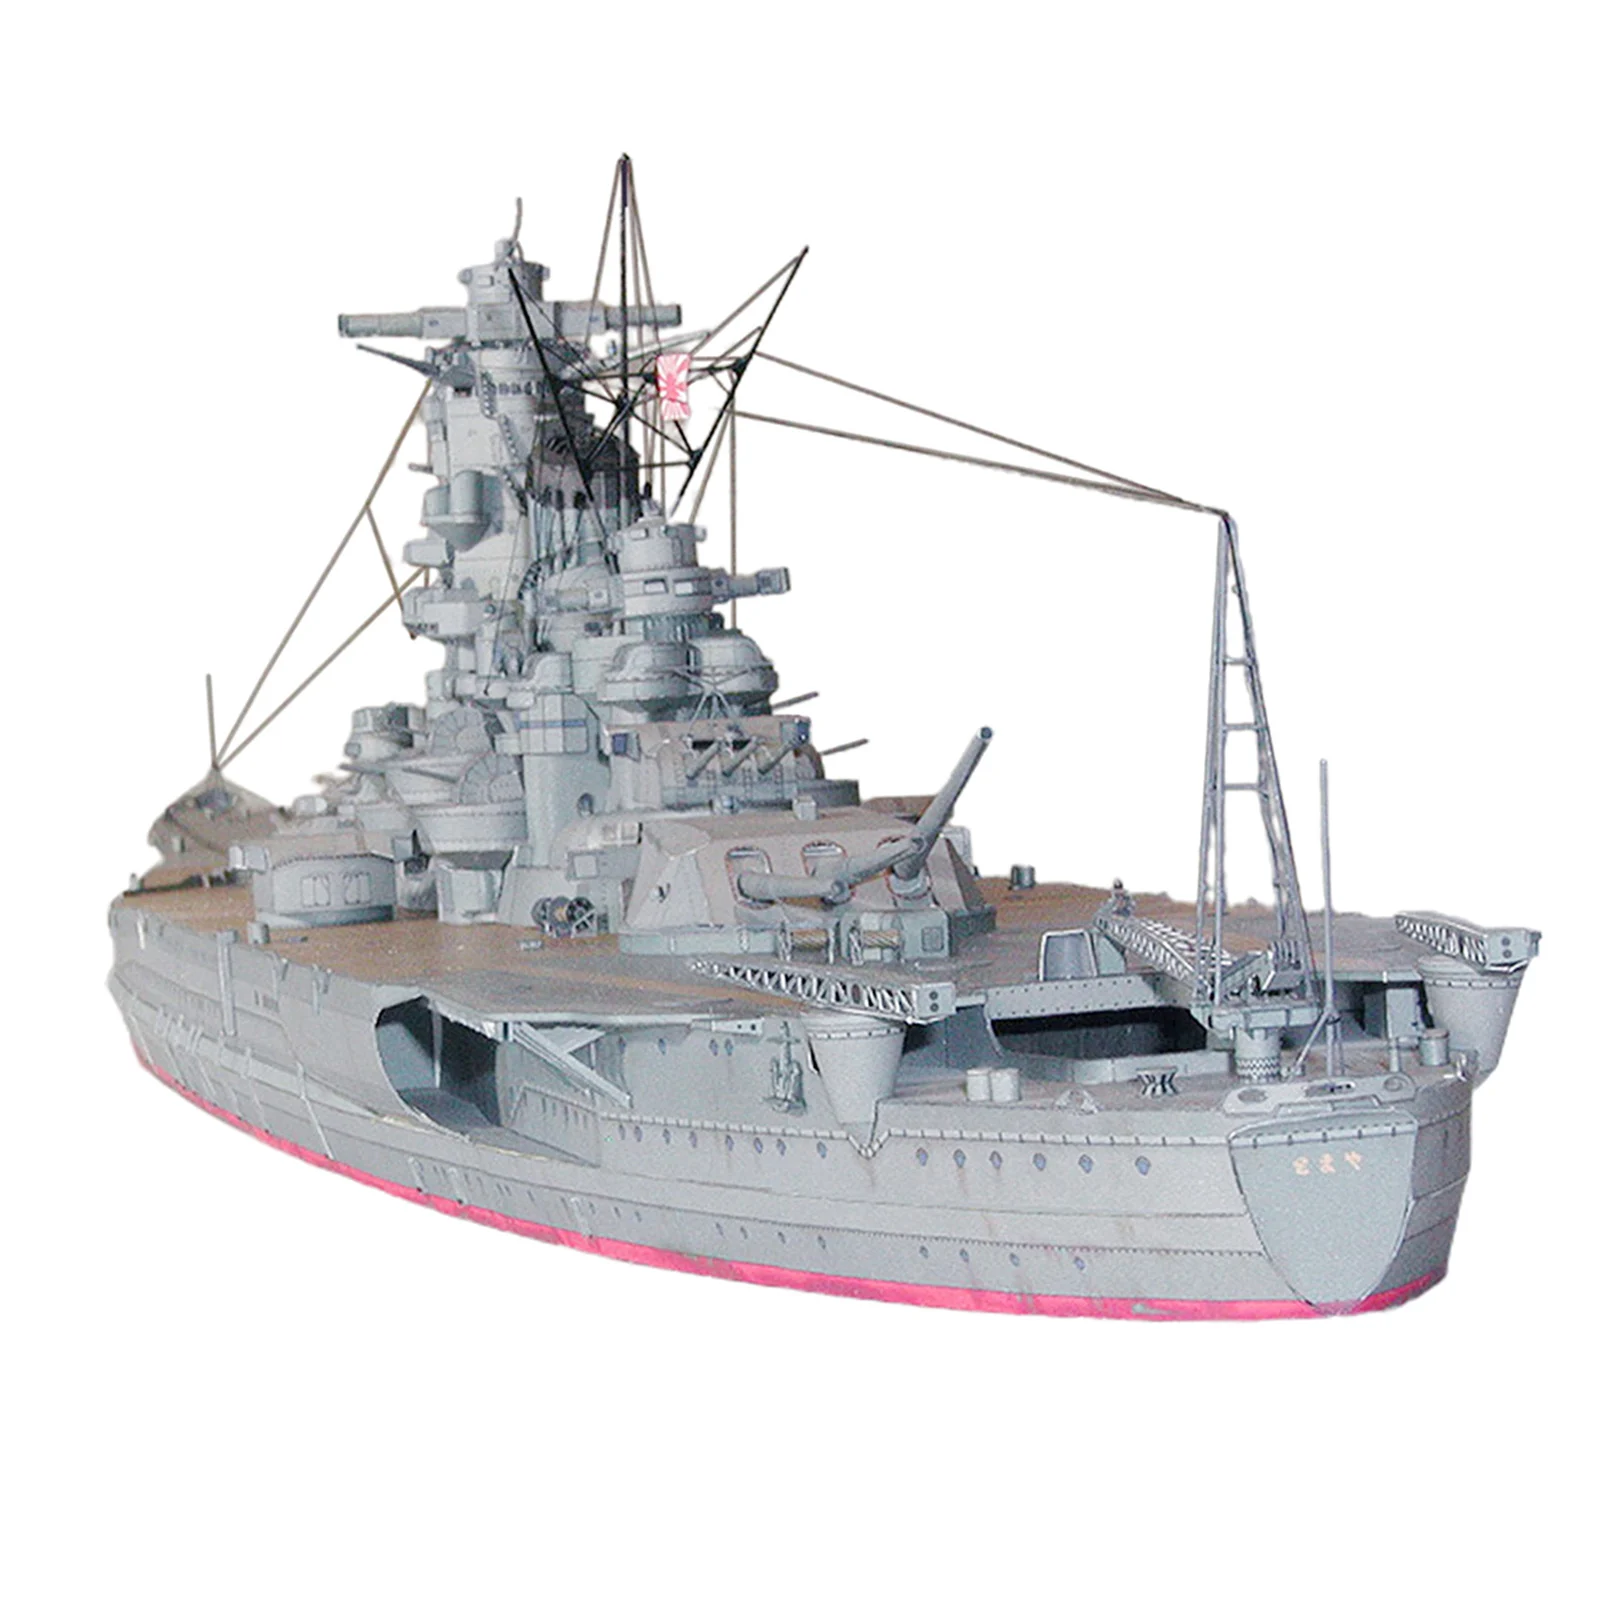 Yamato Navy Ship Puzzle Assemble DIY Paper Model Kits Game Handmade Toy Collection Home Decoration Ornaments